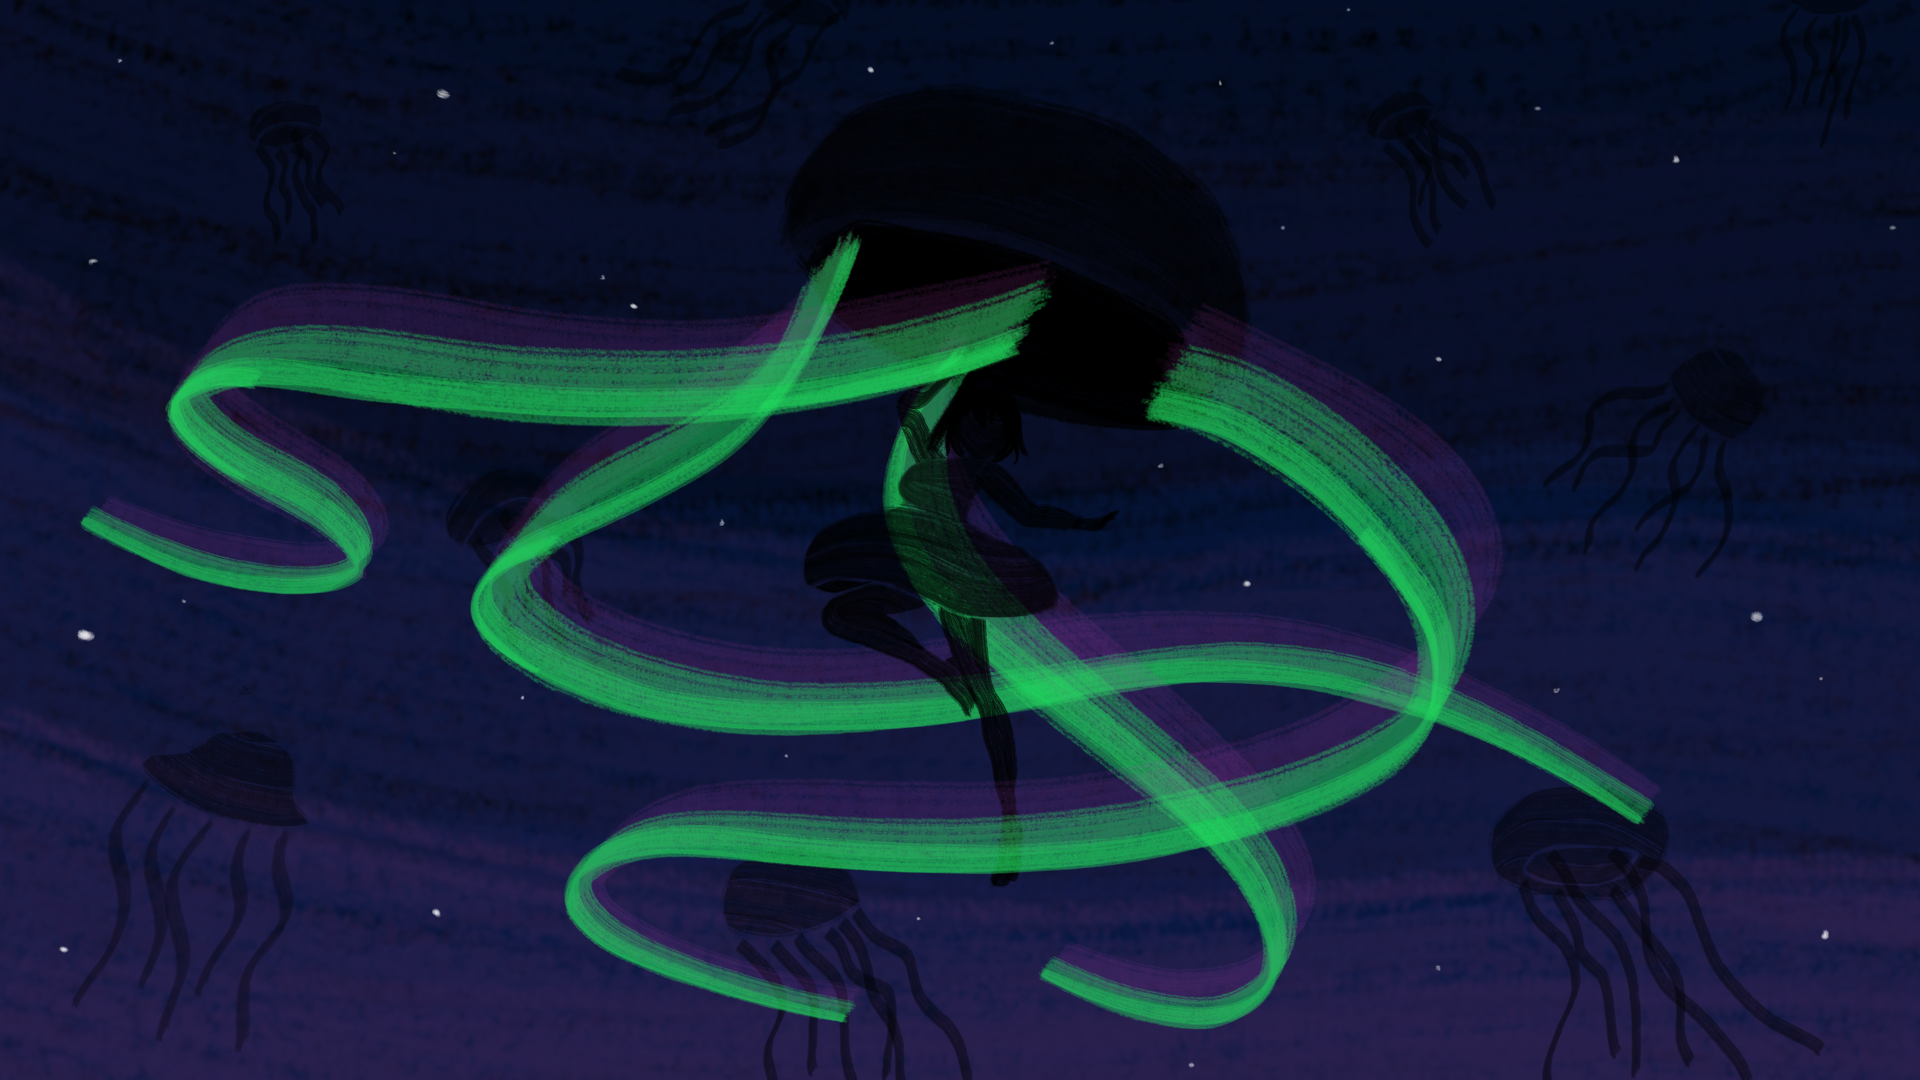 Four glowing green ribbons of aurorae spanning an indigo sky. Etched into the sky are shadows of jellyfish and a woman with an umbrella, from which the aurorae originate.